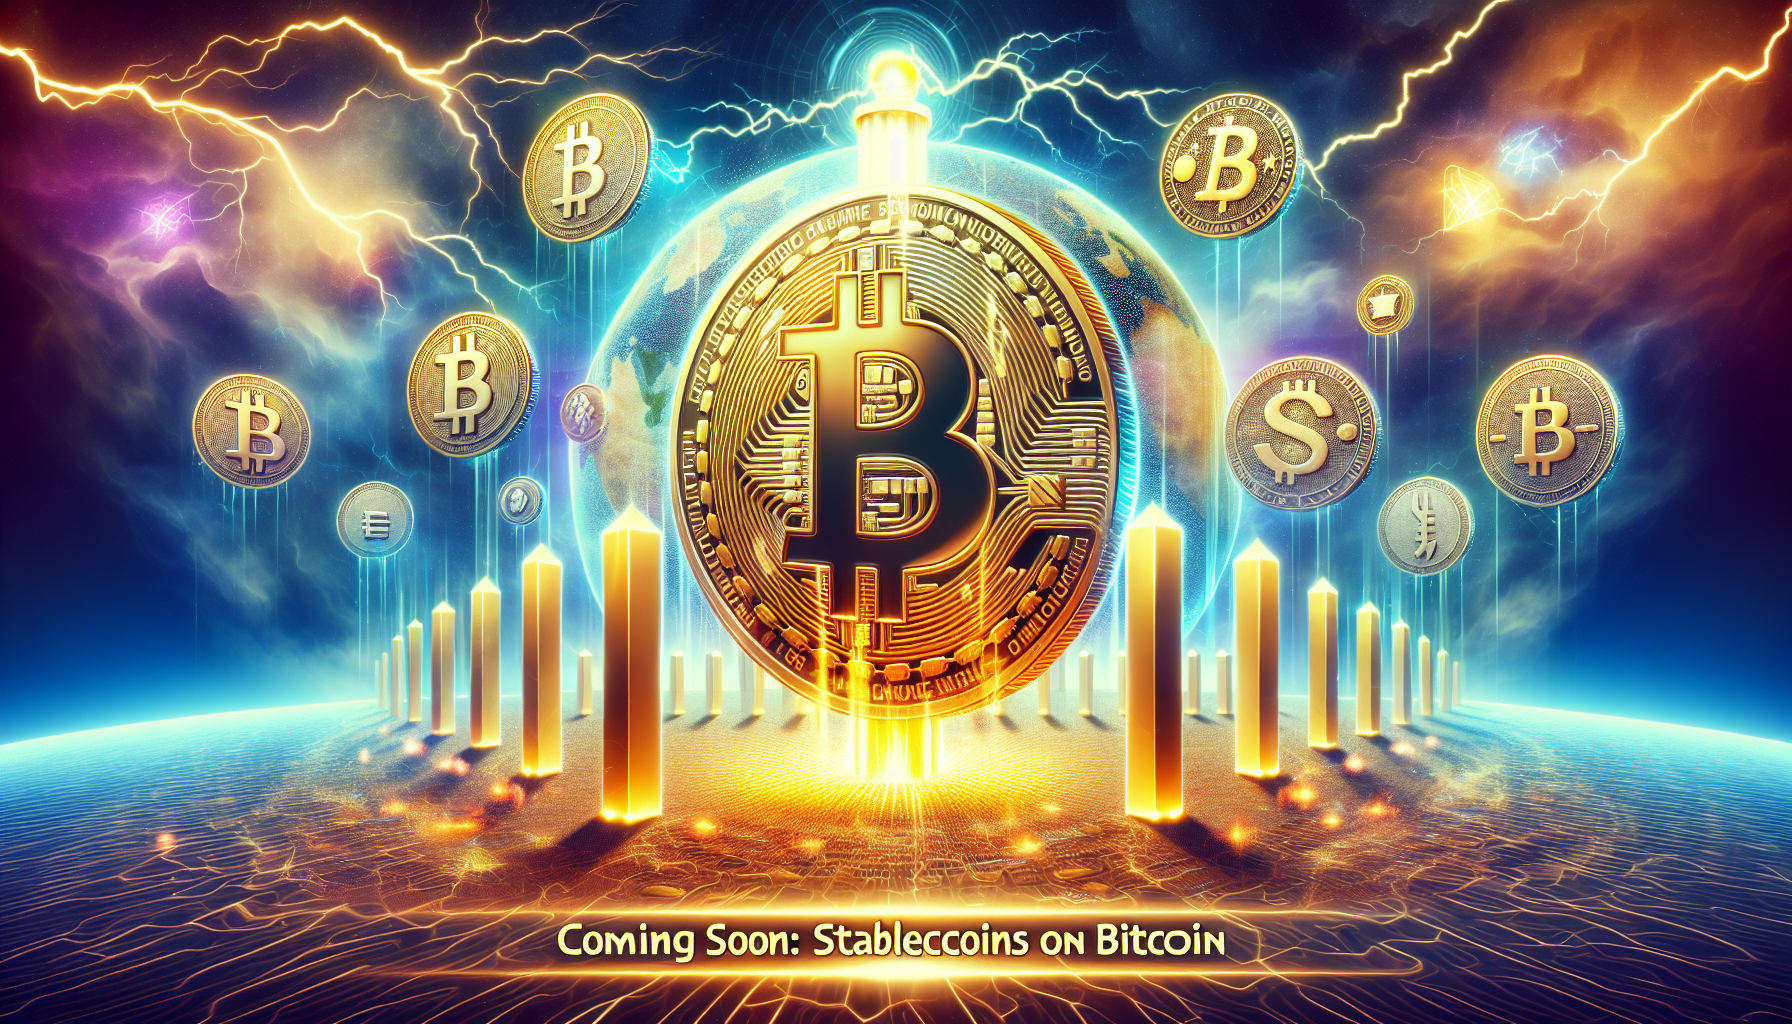 Coming Soon: Stablecoins on Bitcoin, Confirms Lightning Labs CEO